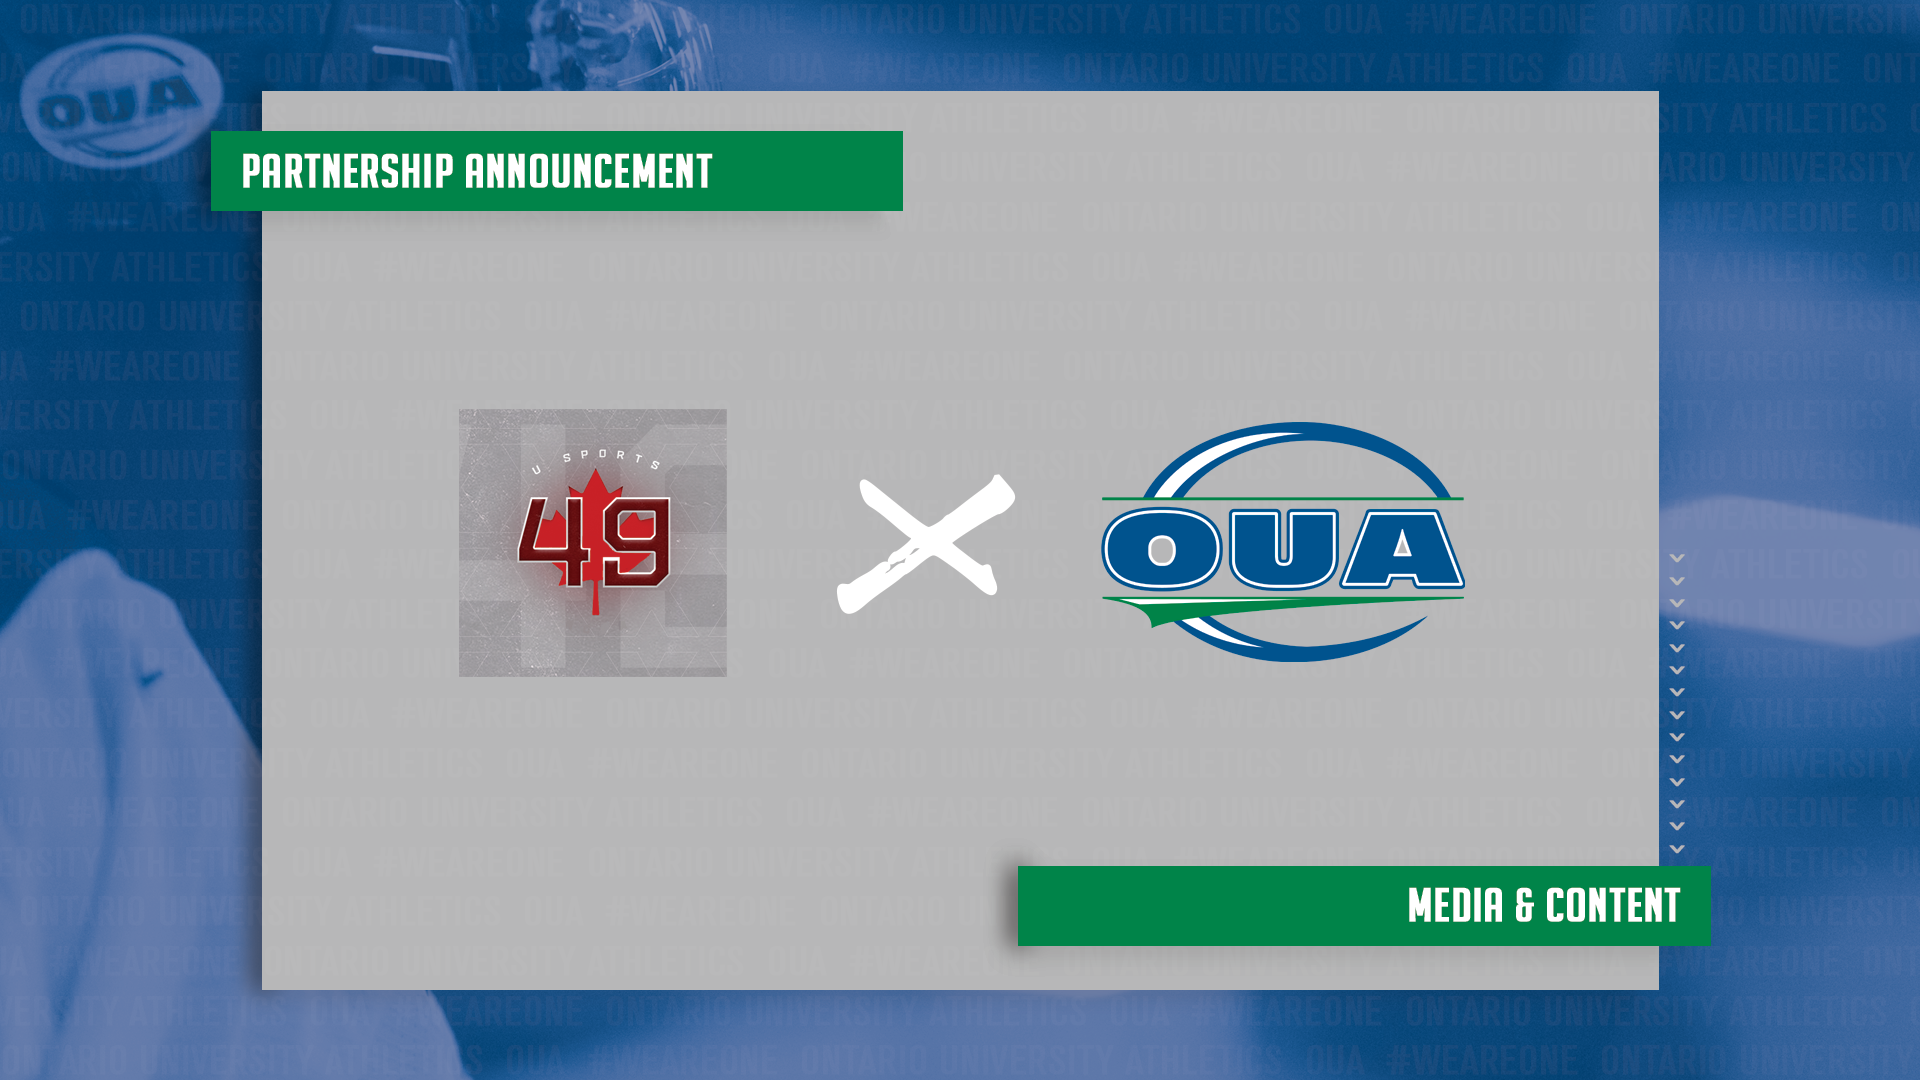 OUA partners with 49 Sports for 2022-23 season